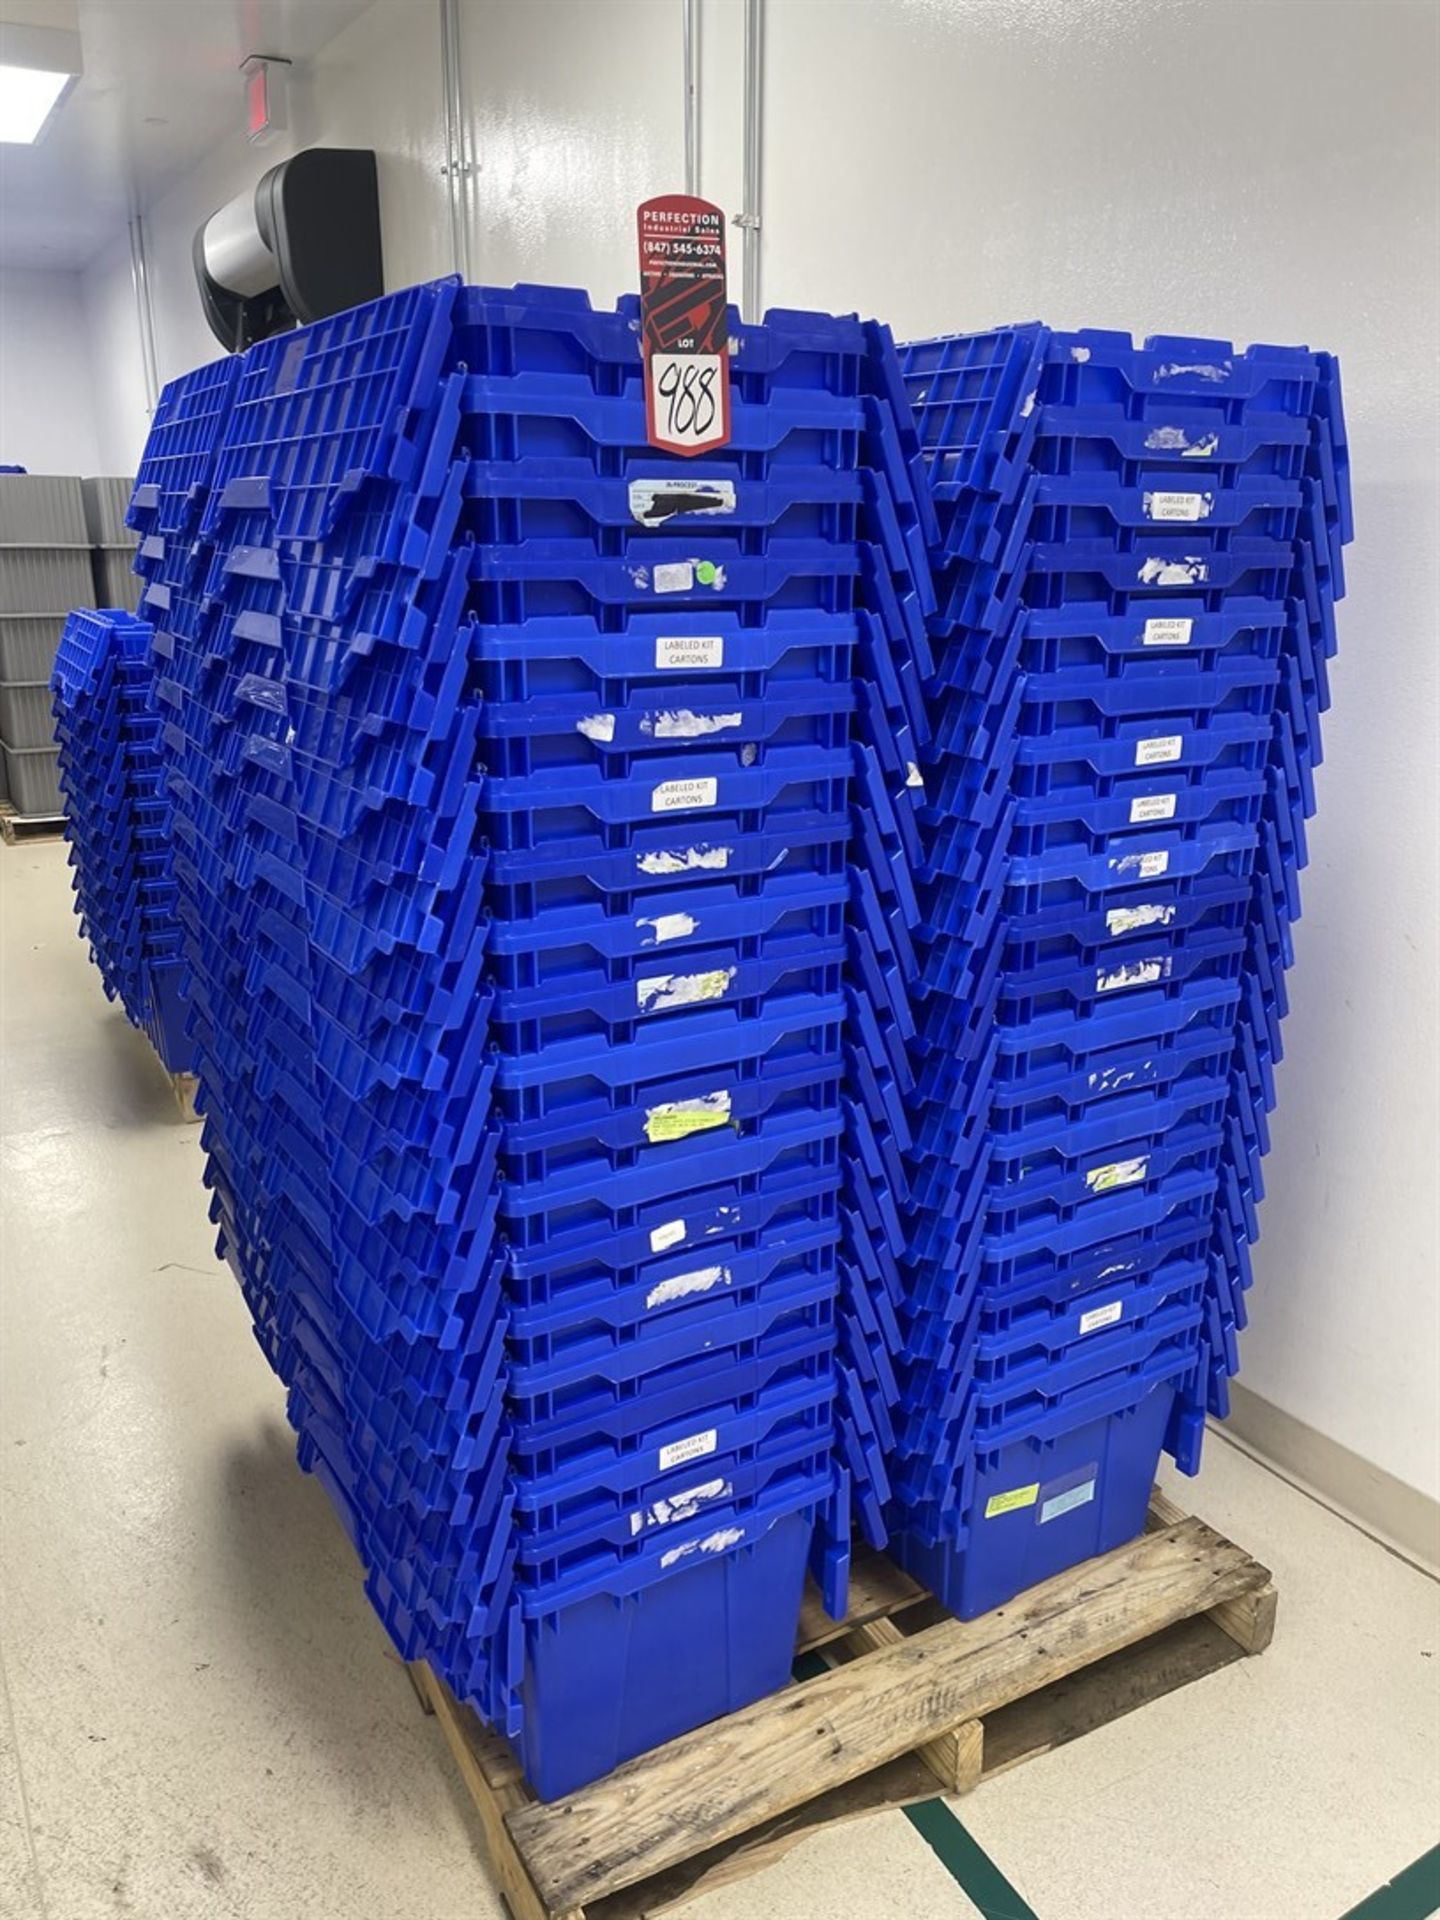 Pallet of AKRO-MILS Attached Lid Containers